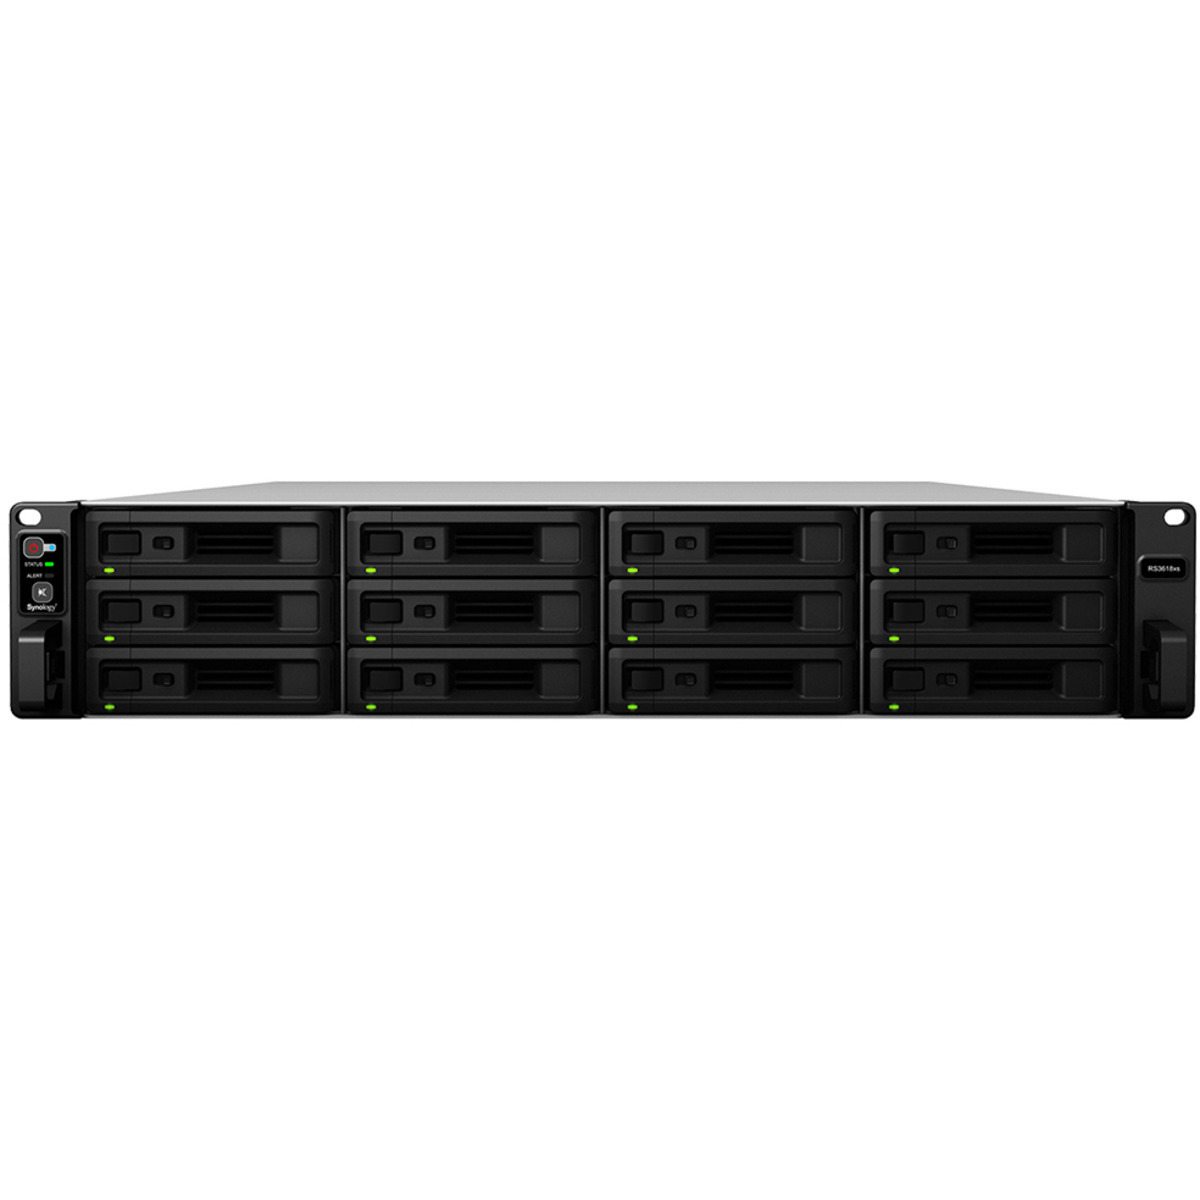 Synology RackStation RS3618xs 120tb 12-Bay RackMount Large Business / Enterprise NAS - Network Attached Storage Device 12x10tb Western Digital Ultrastar DC HC330 WUS721010ALE6L4 3.5 7200rpm SATA 6Gb/s HDD ENTERPRISE Class Drives Installed - Burn-In Tested RackStation RS3618xs